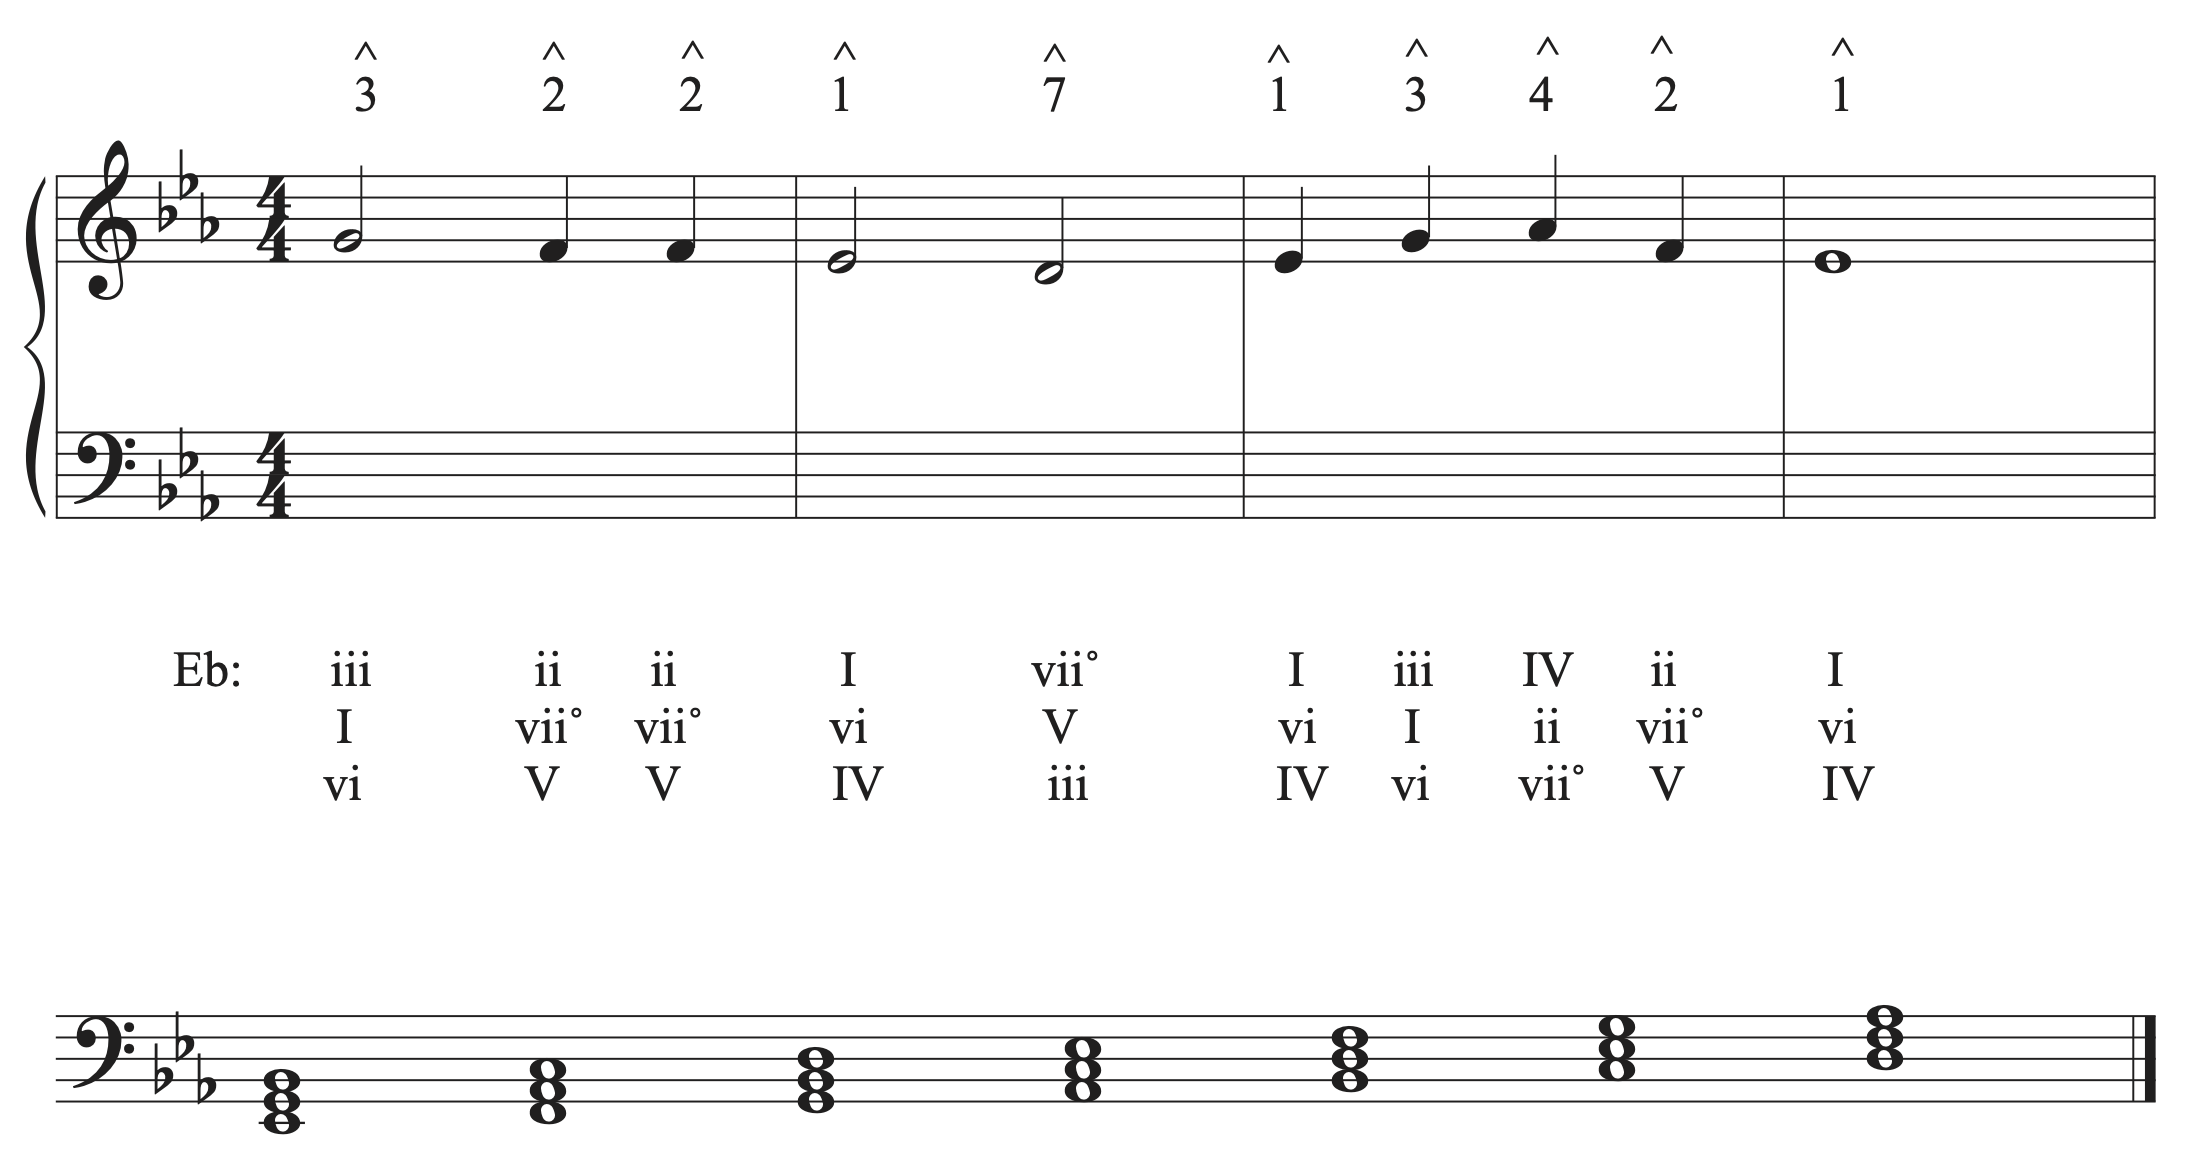 The musical example in E-flat major with scale degrees above each note in the soprano, a list of triads found on each scale degree in the key, and a list of the chords possible on each scale degree in the soprano.